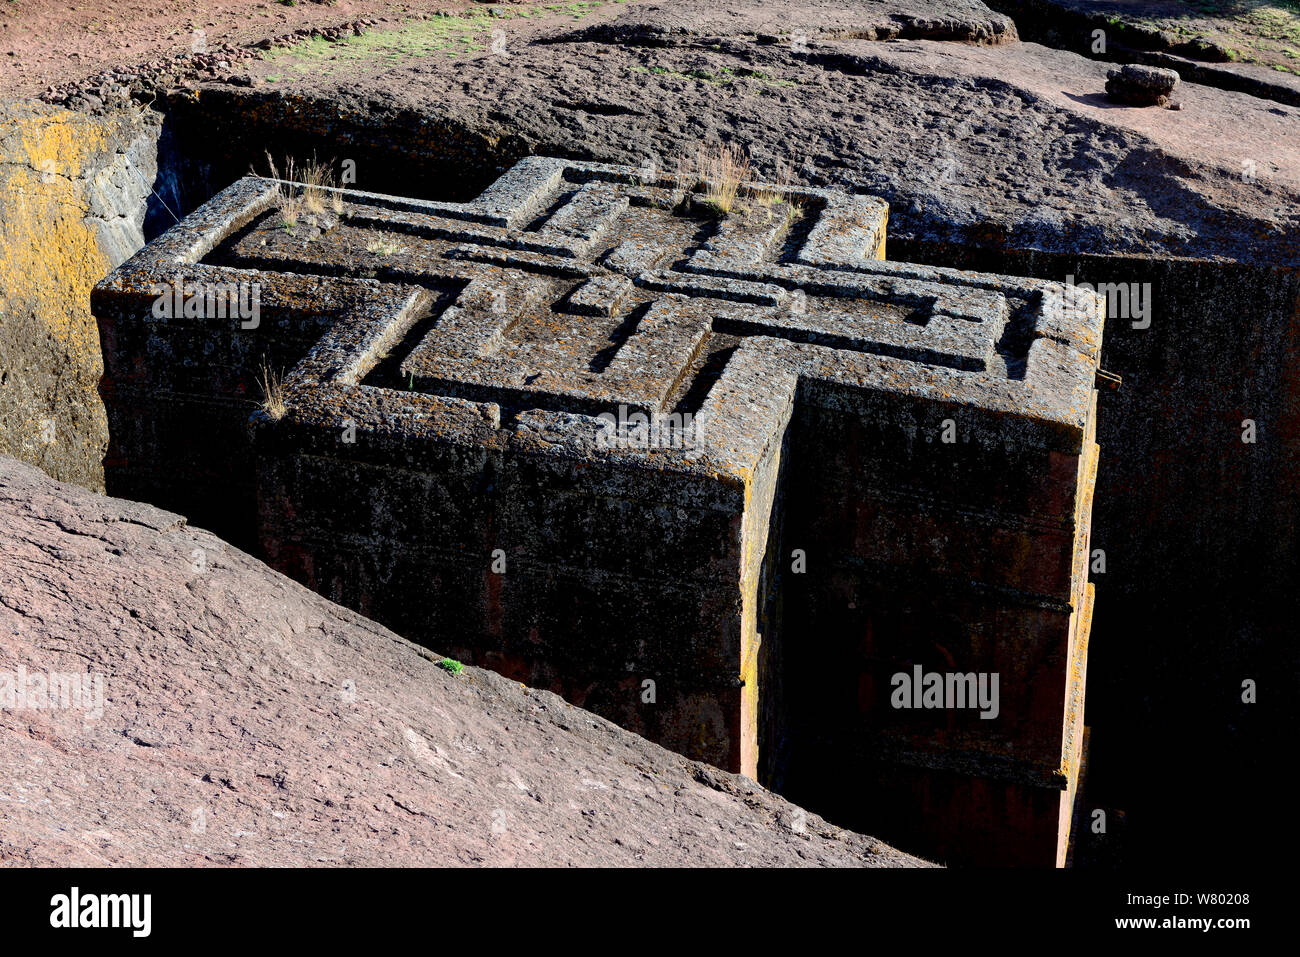 Bet Giyorgis Church, carved from solid limestone tufa rock, viewed from above to show the cross shape of the church. Lalibela. UNESCO World Heritage Site. Ethiopia, December 2014. Stock Photo